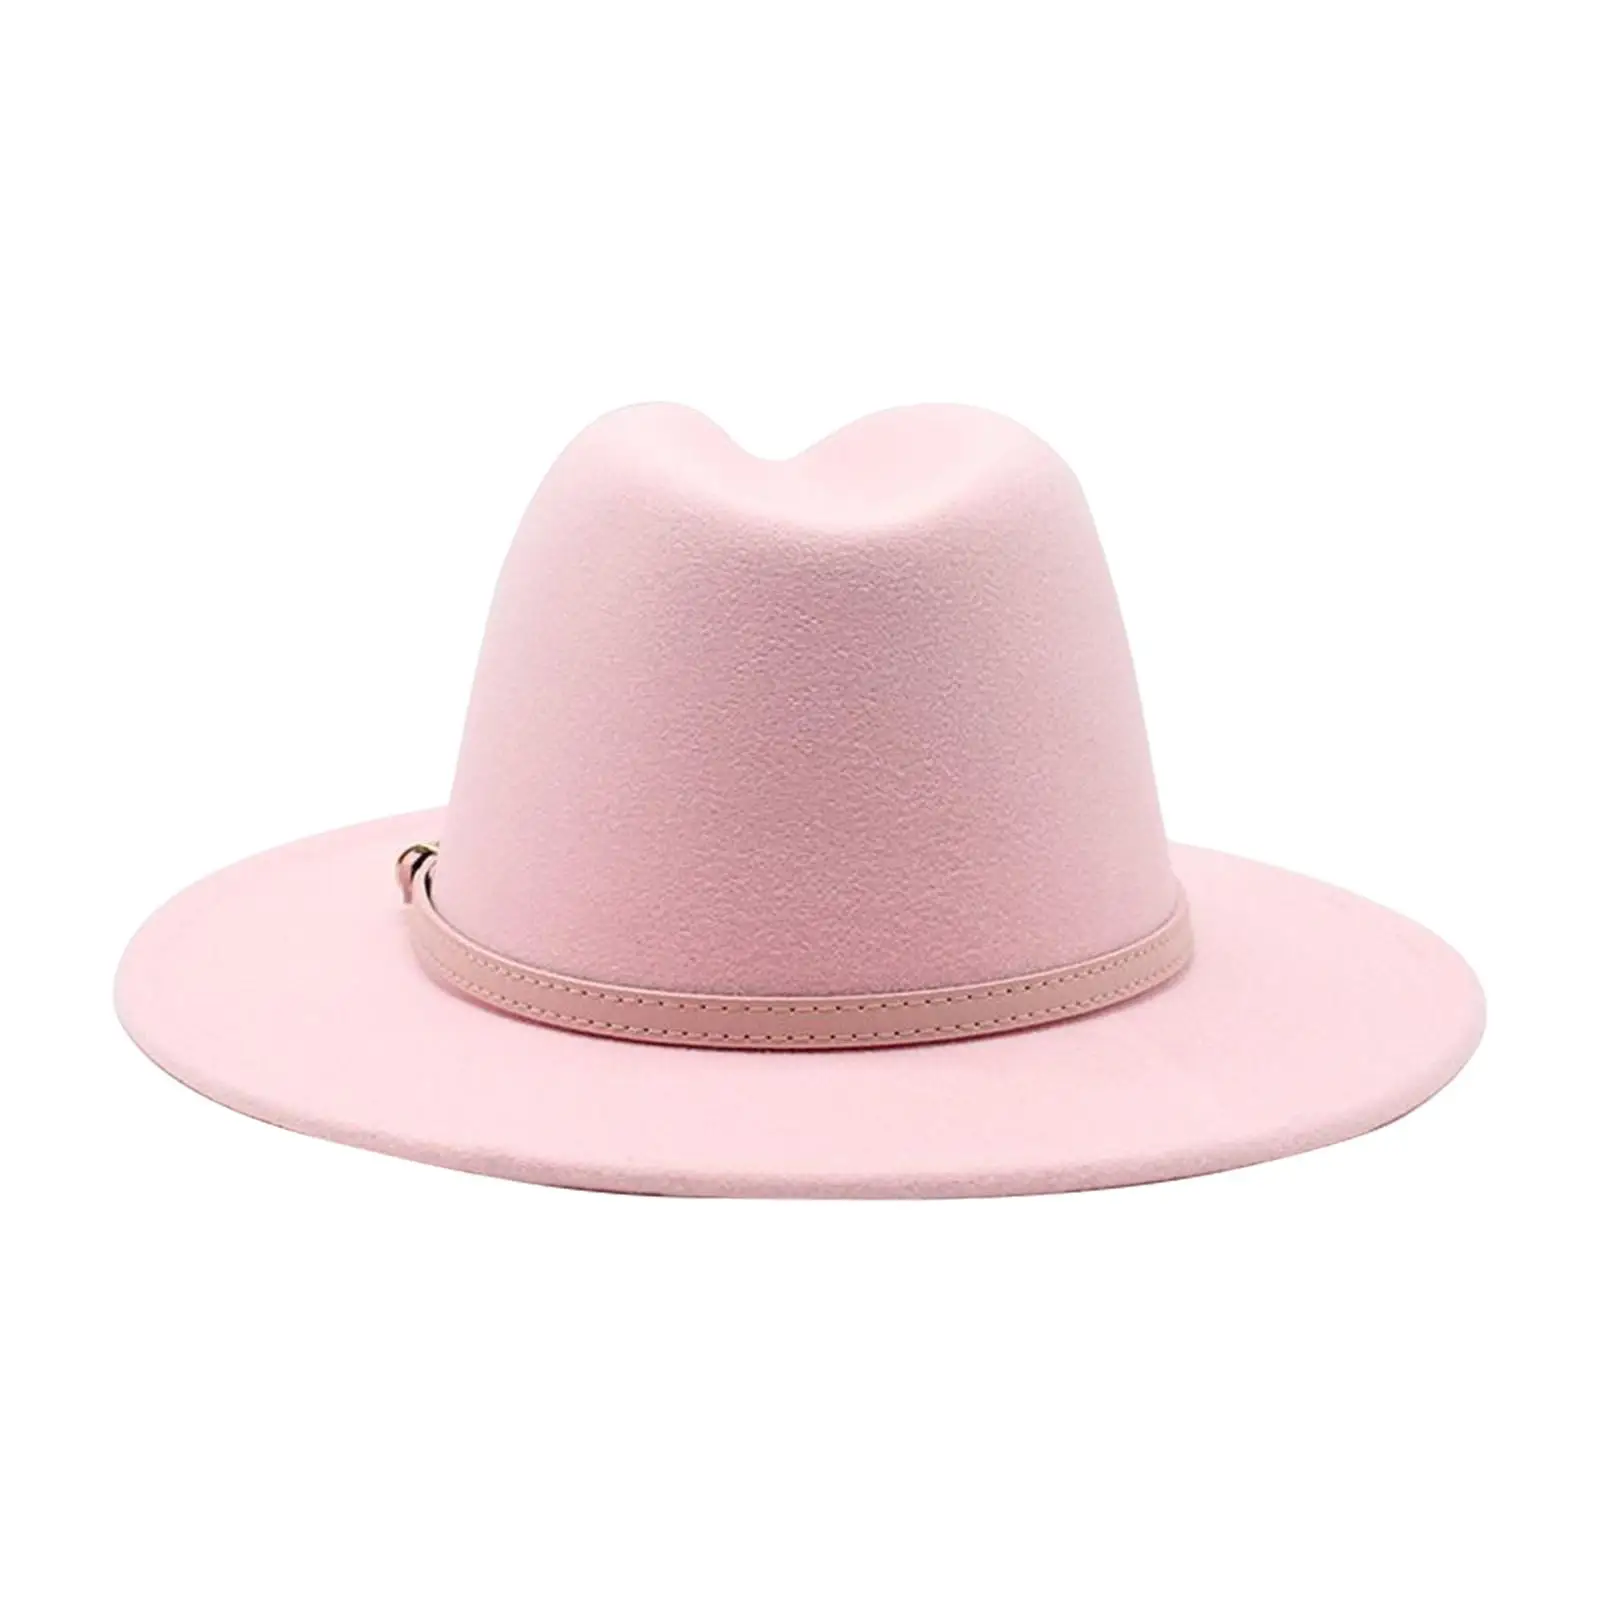 Women Fedora Hats Classic Belt Buckle Thermal Cowgirl Cap Wide Brim Casual Adjustable Panama Hat for Beach Travel Party Adults